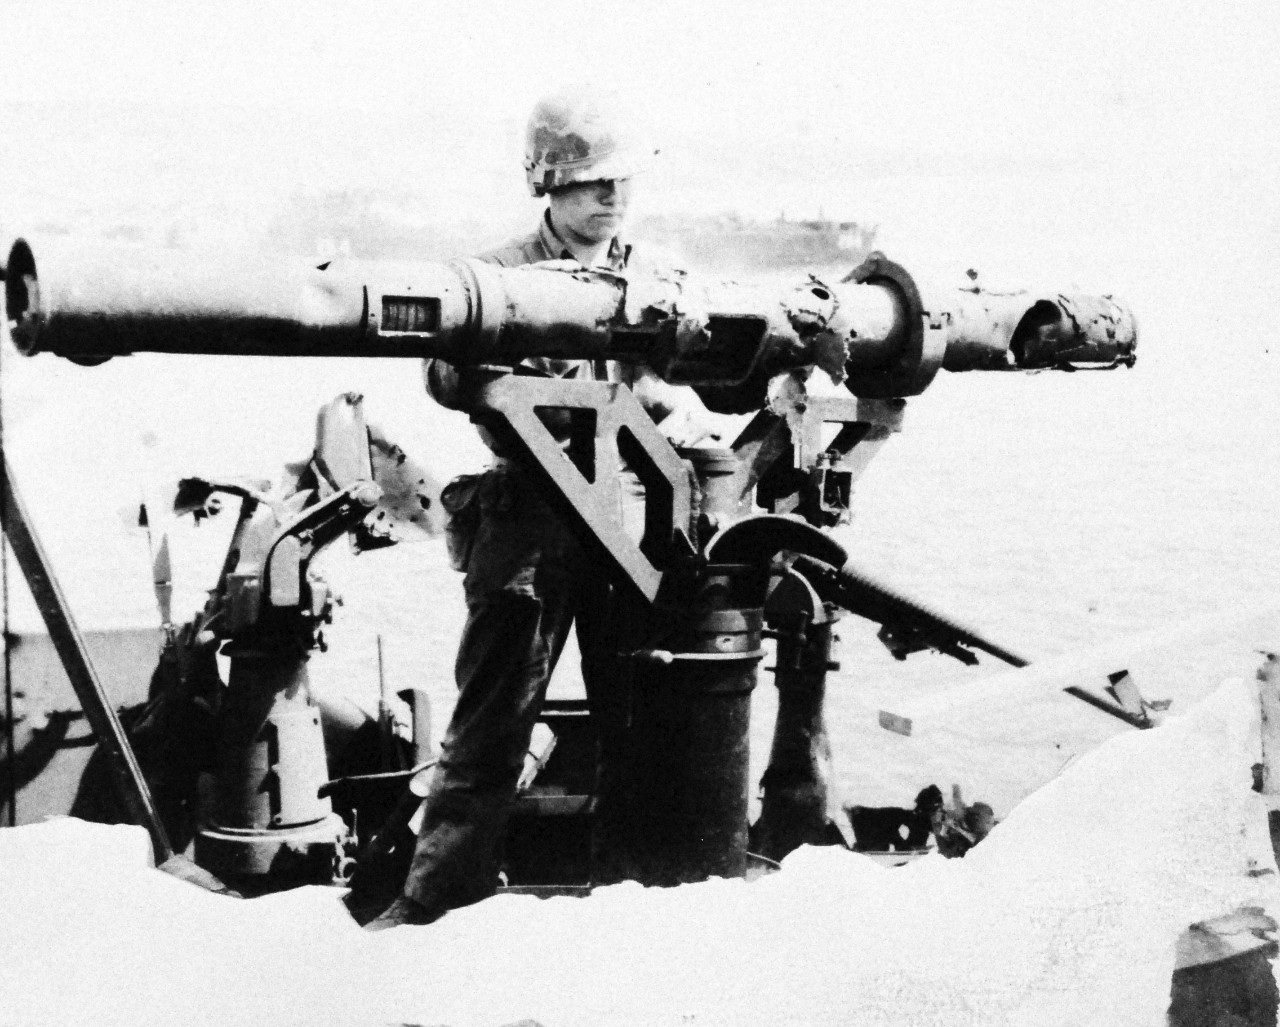 127-GW-304-143248:  Battle for Iwo Jima, February-March 1945.   Range finder on forward bridge of Japanese APD 25mm gun background on starboard side.     Photographed by Morejohn, March 1945.  U.S. Marine Corps photograph, now in the collections of the National Archives.  (2016/02/17).